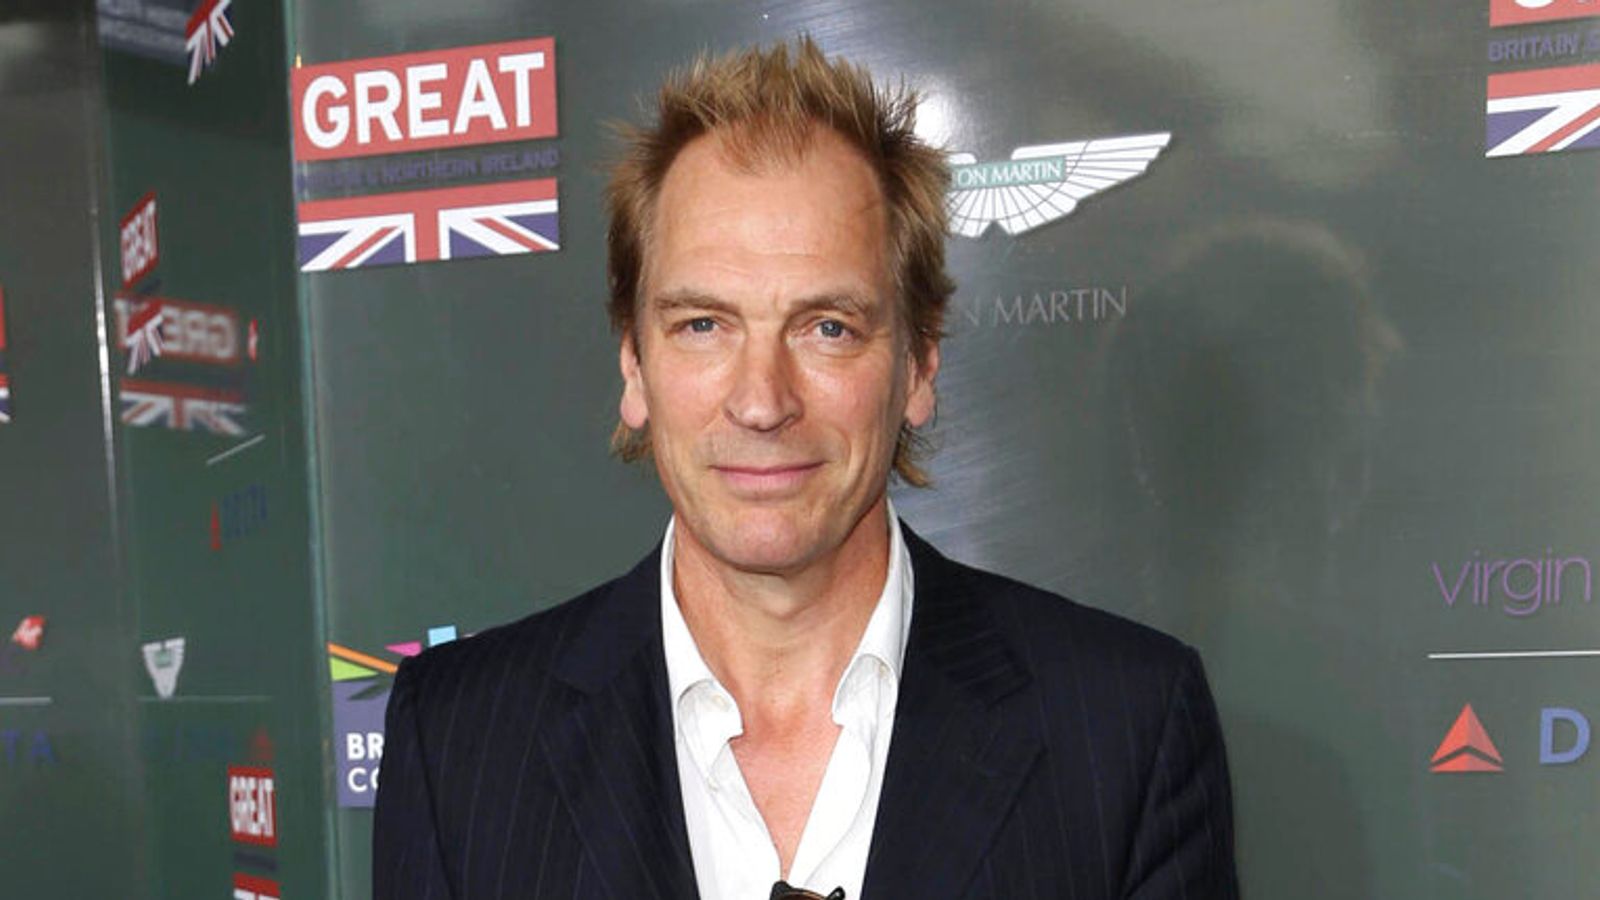 Julian Sands: Outcome of search for missing actor 'may not be what we would like', say police